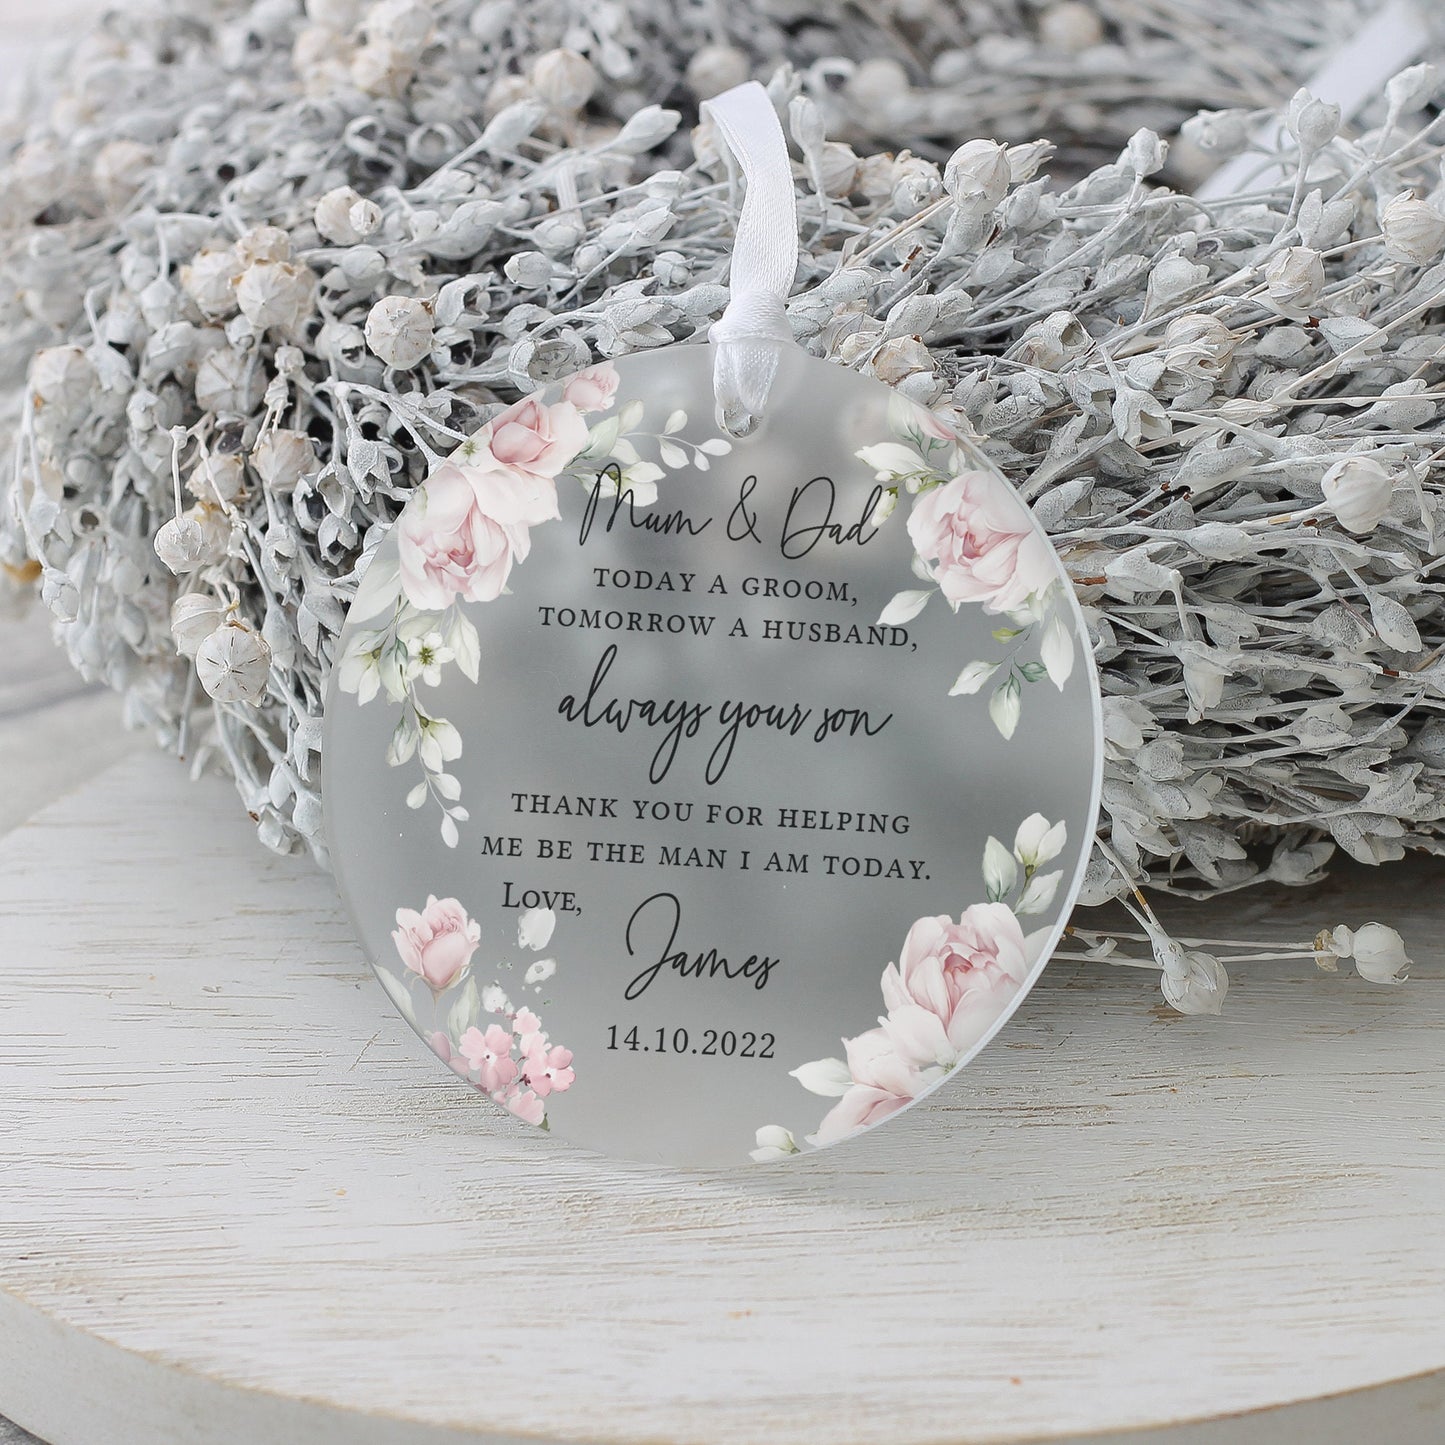 Mother of the Groom Gift, Frosted Acrylic, Groom to Mother, Gifts from Groom, Wedding Day Gifts, Mum of Groom Gifts, Father of Groom Gifts